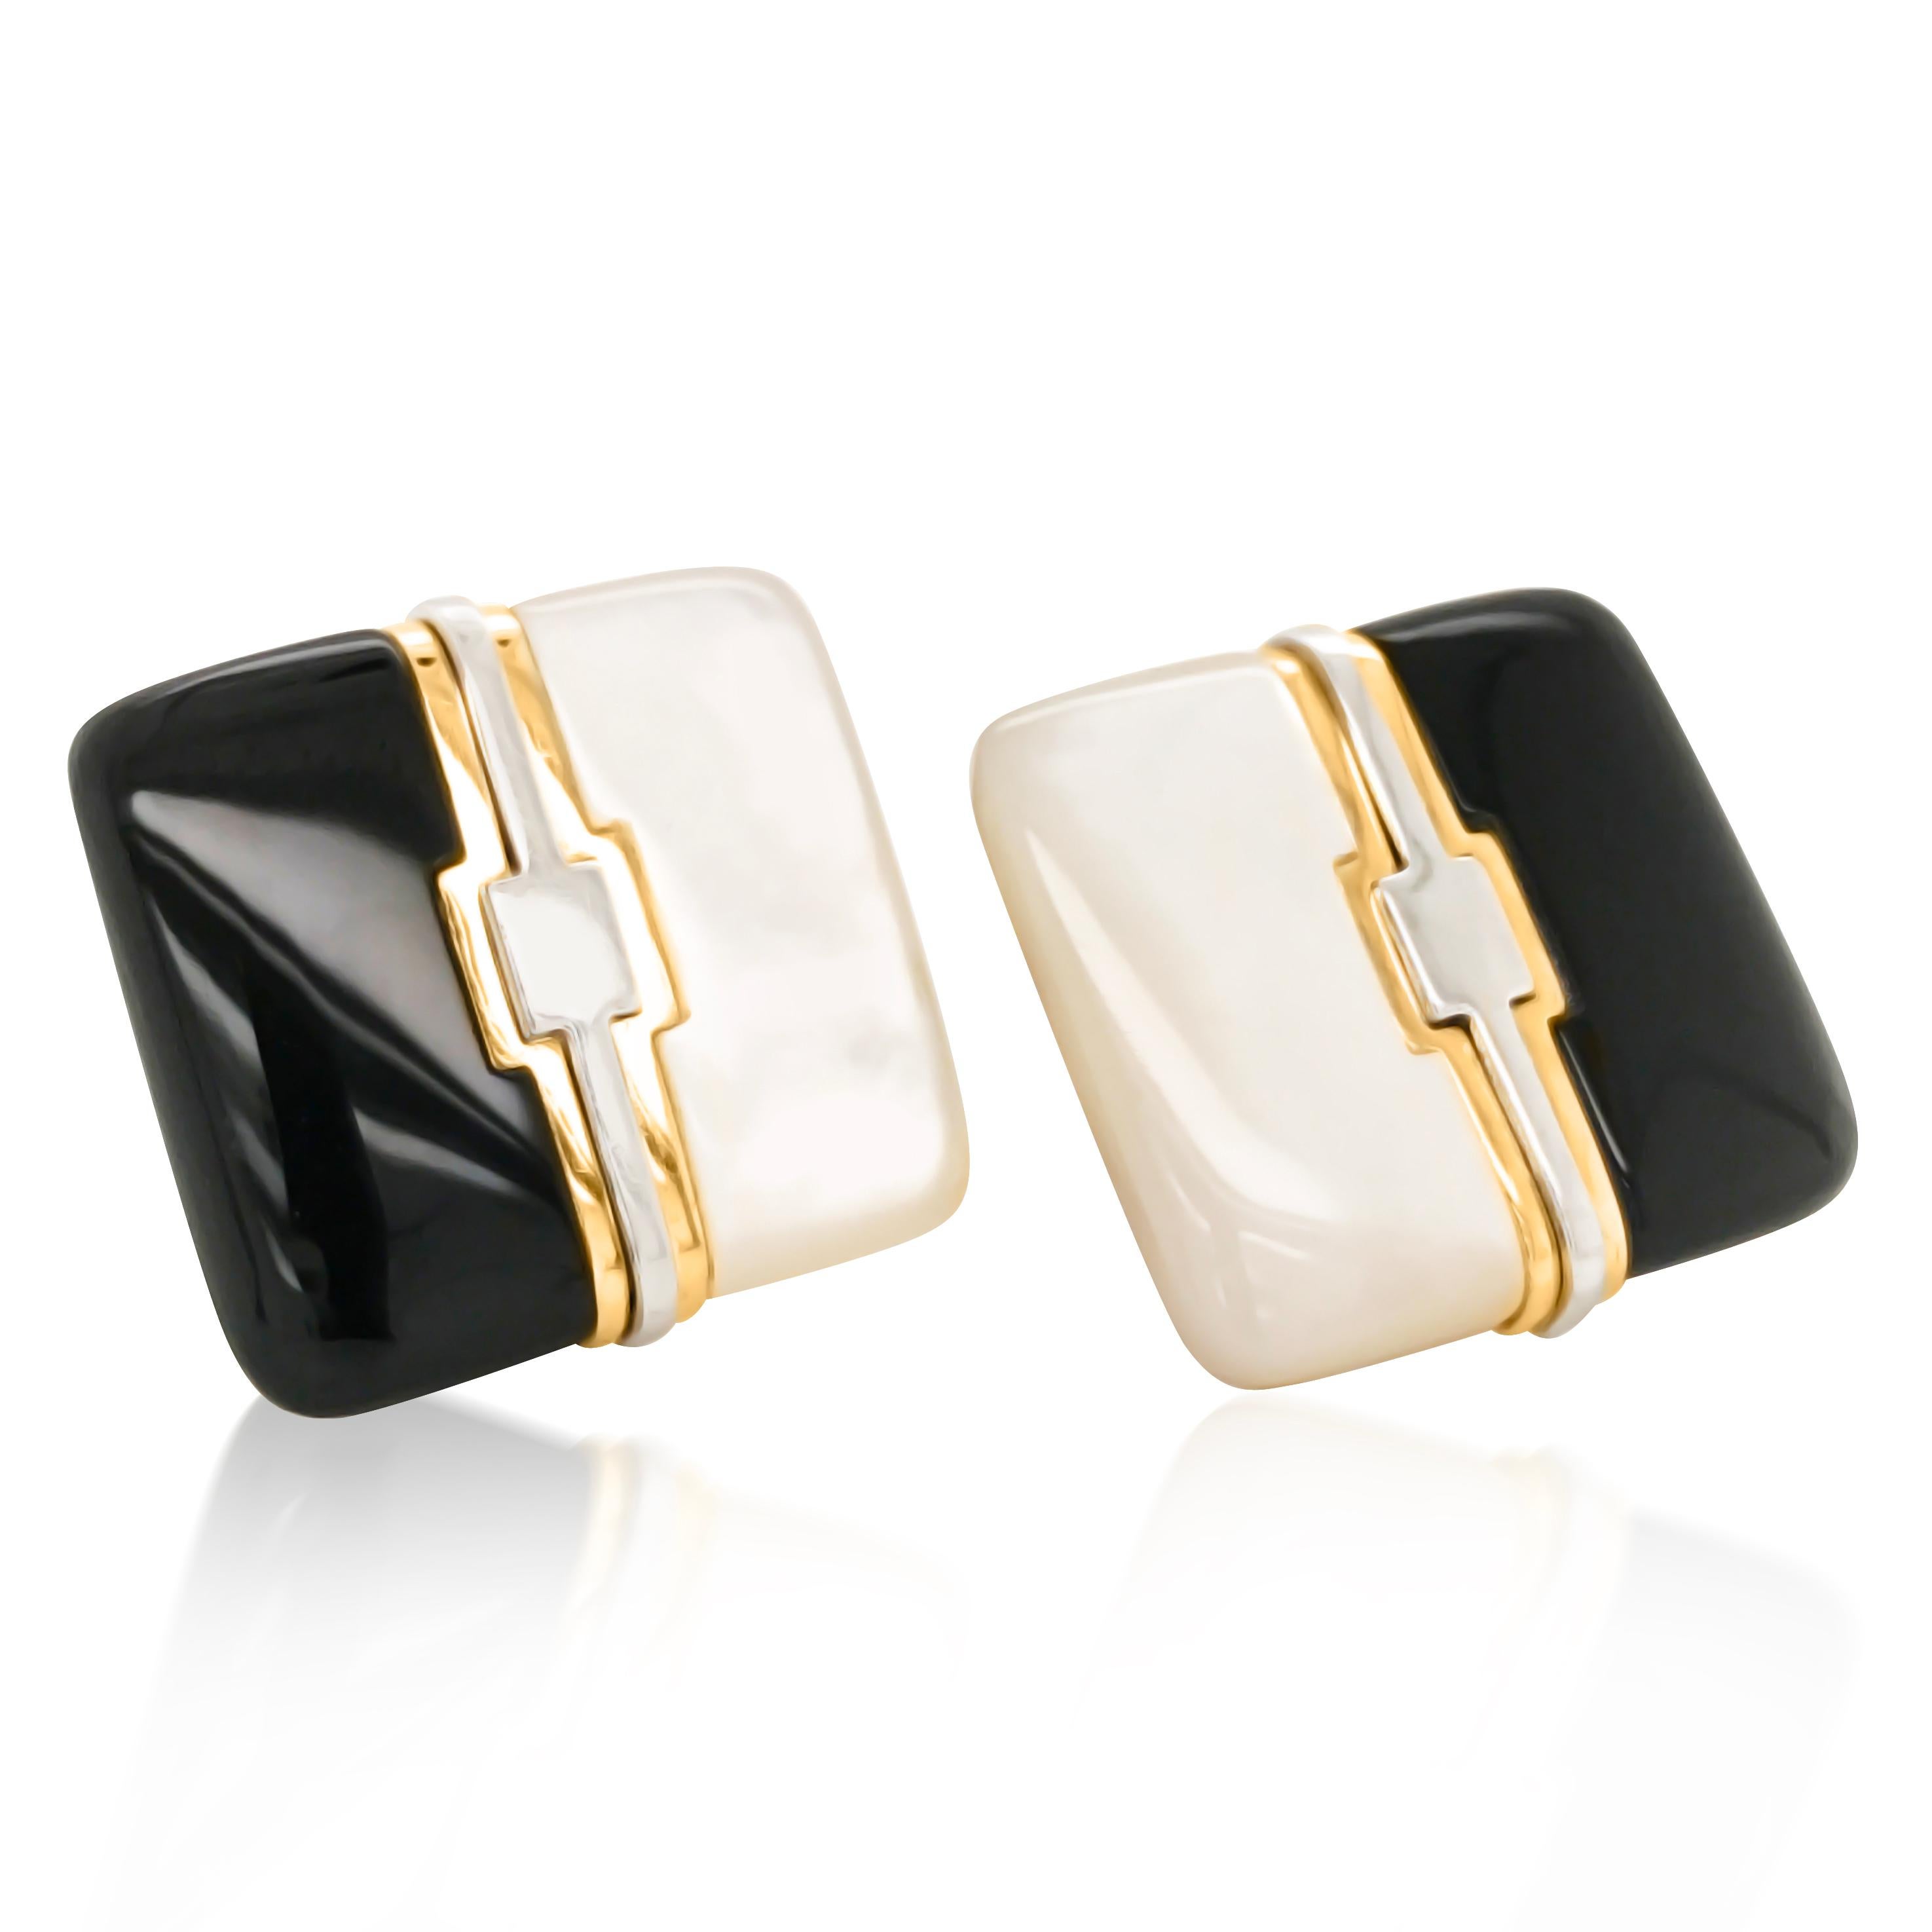 These glamorous and stylized square gold earrings are centered with 18K white and yellow gold connecting black agate and nacre (aka mother of pearl). The geometric designed earrings weigh 19.96 grams and measure 2.5*2.5cm.

Weight: 19.96 grams